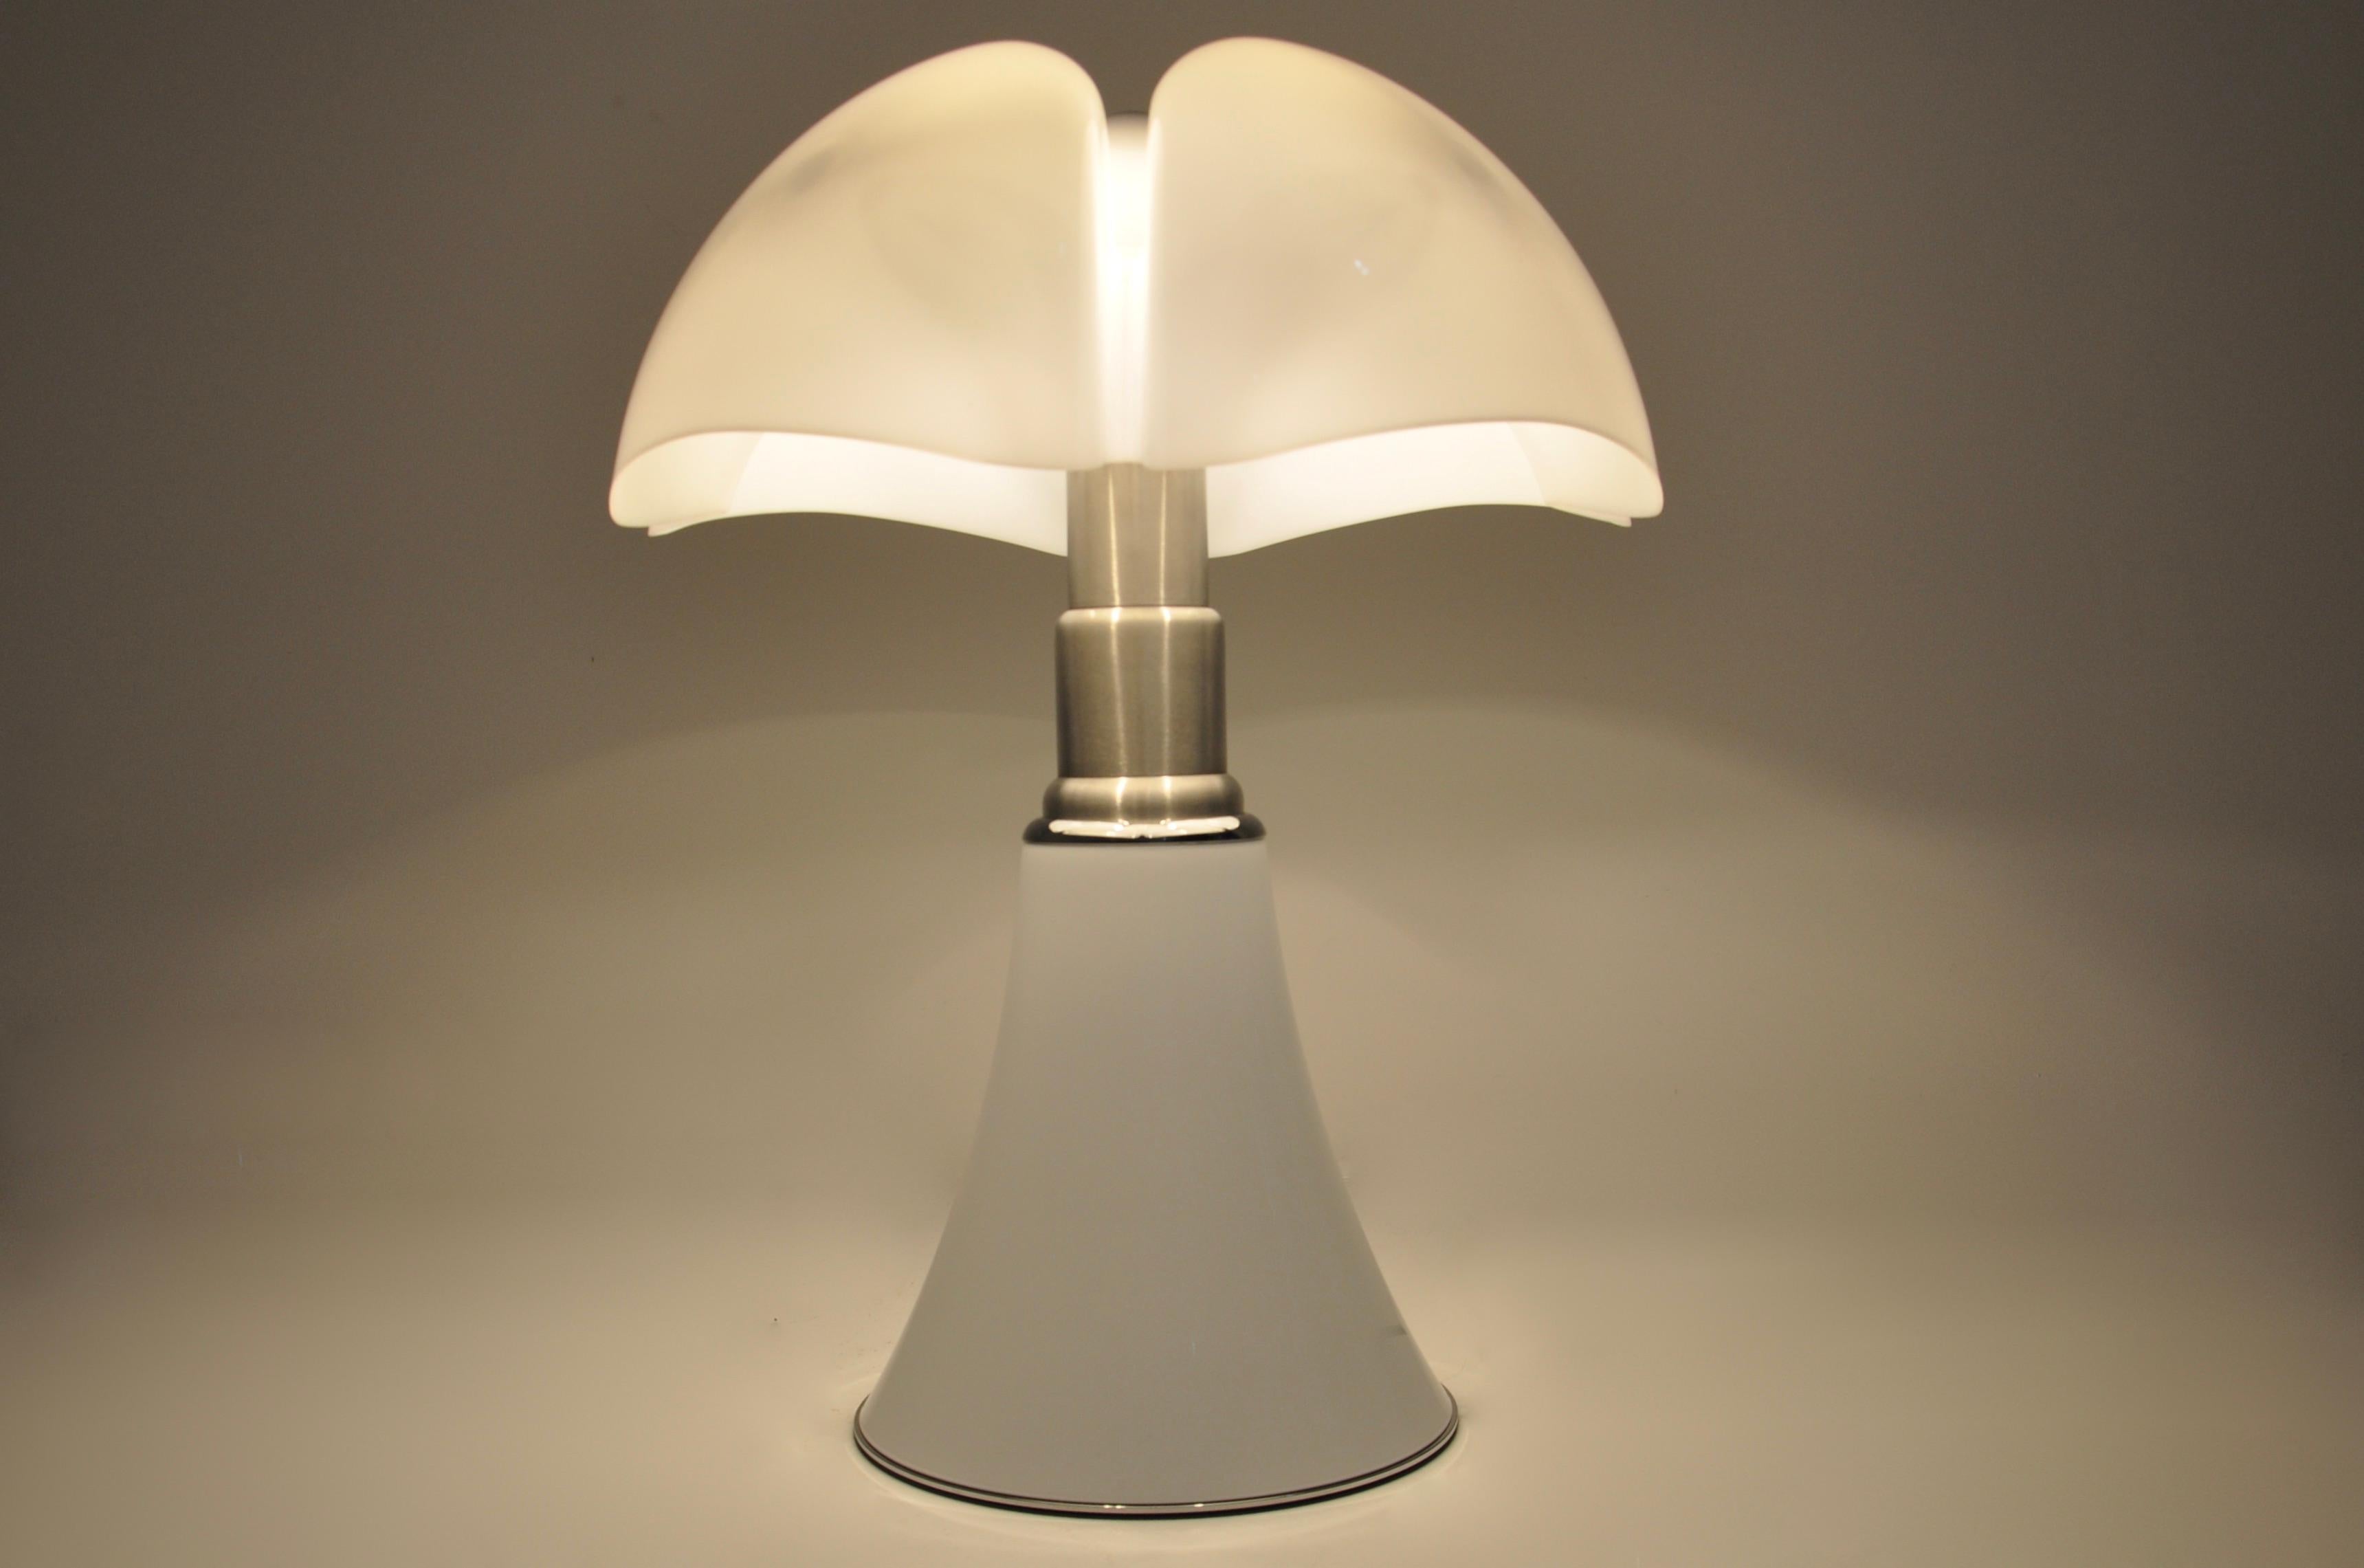 White lamp in metal and plastic by Gae Aulenti. Adjustable in height min: 70cm max: 90cm 
Stamped under the lamp.
Wear due to time and age of the lamp.